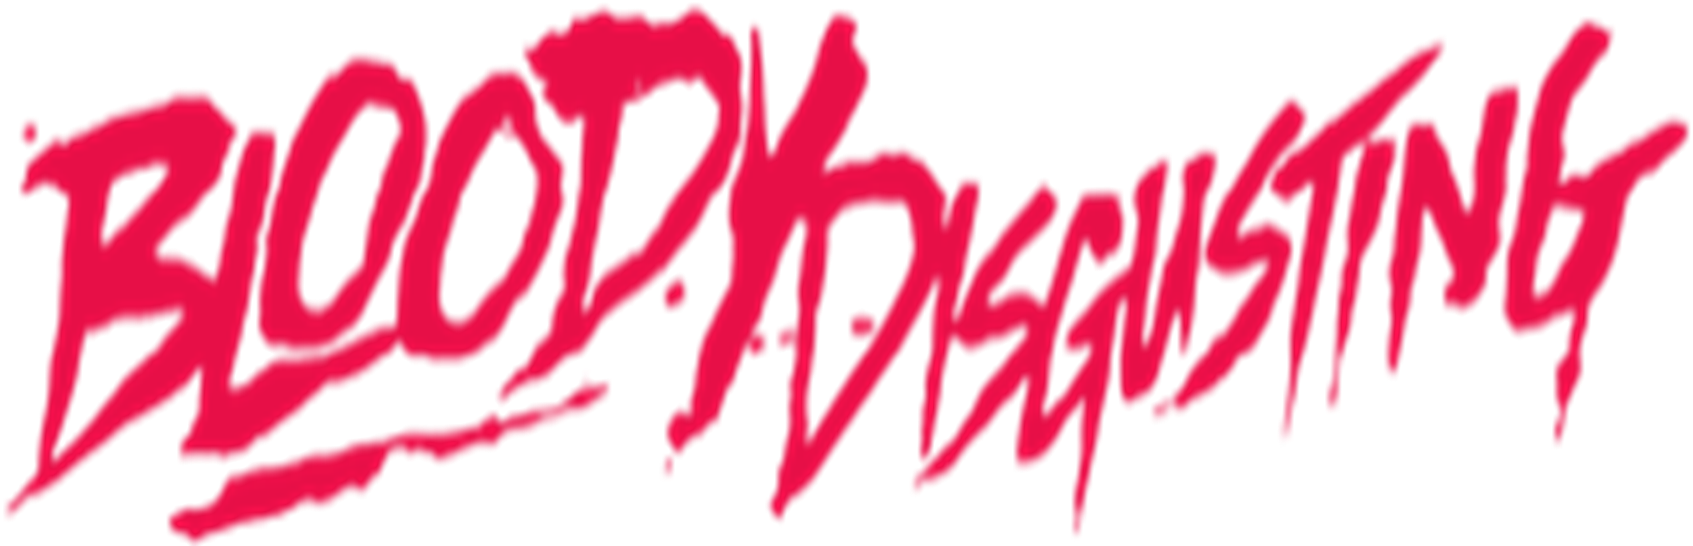 Bloody Disguisting Logo